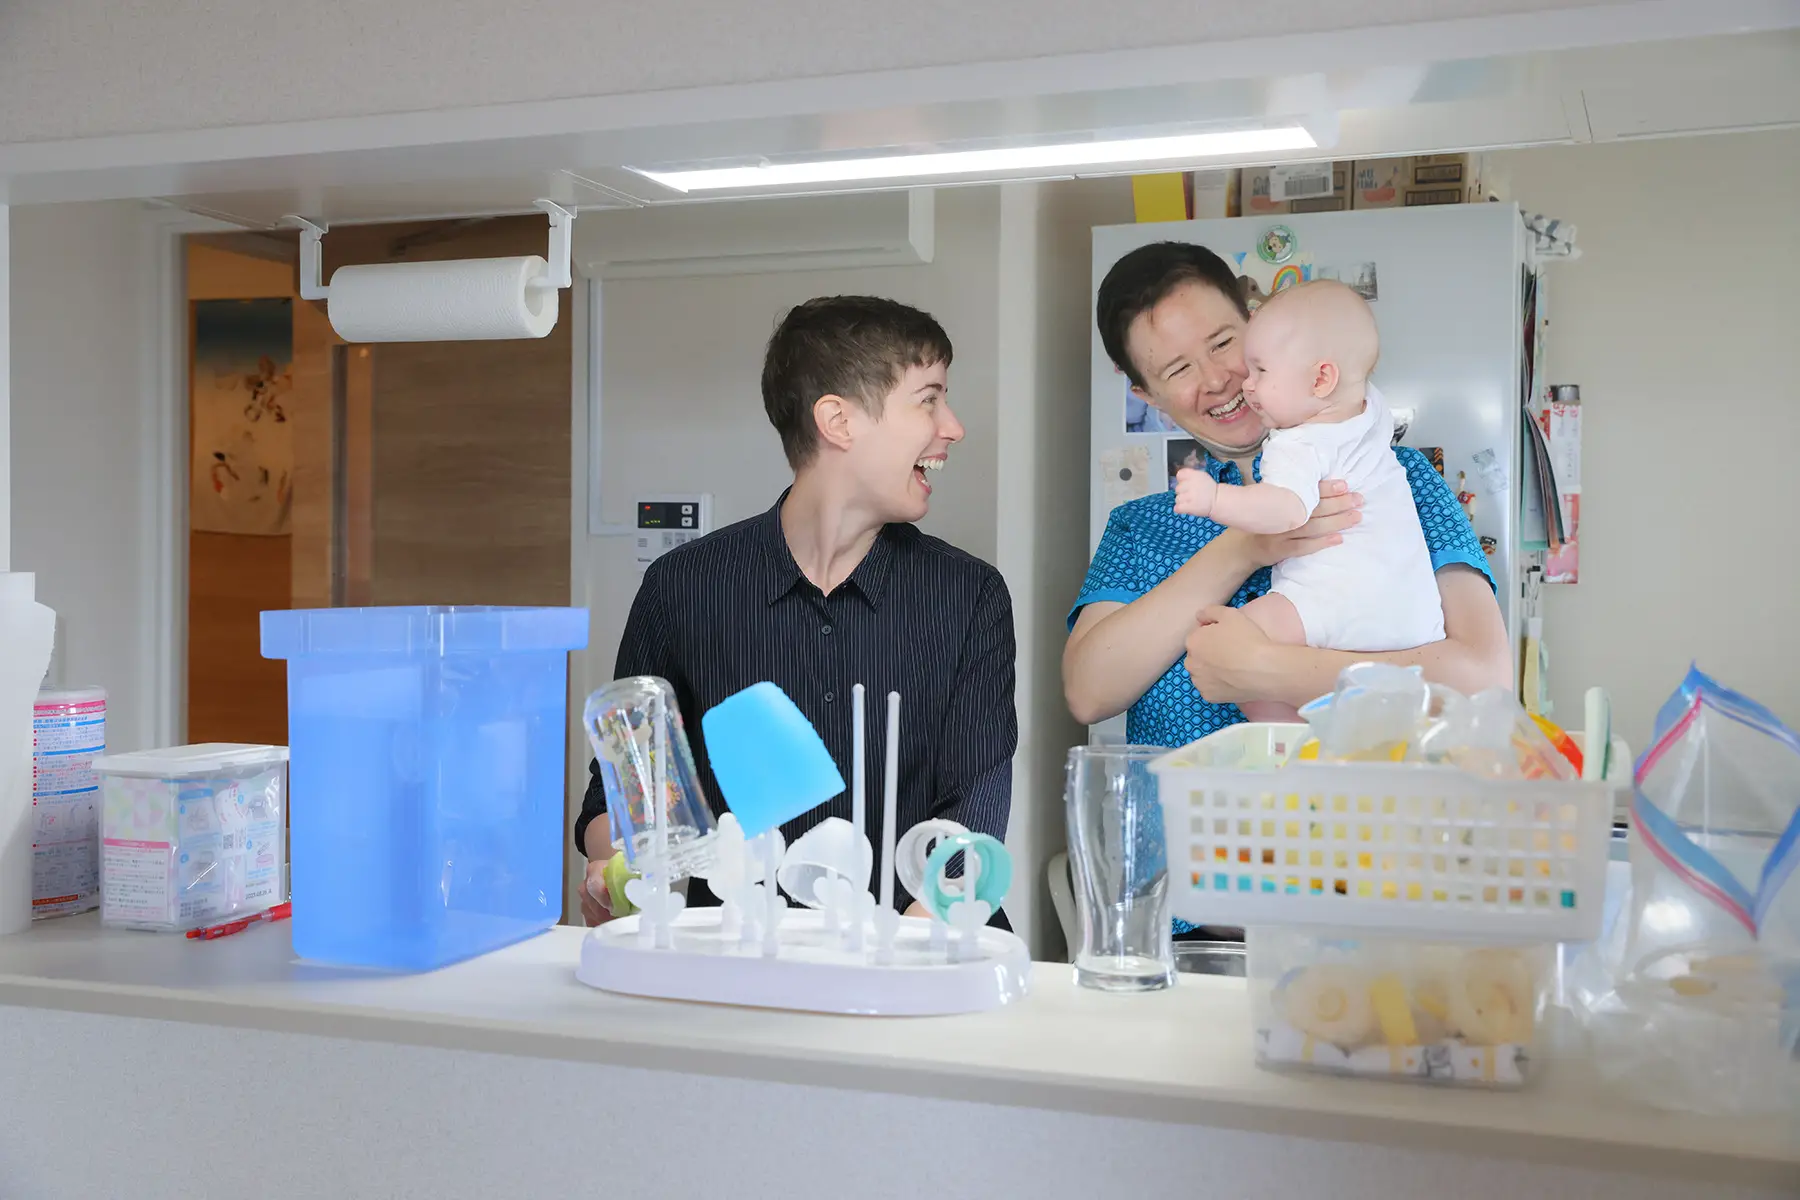 Two mums (a couple) standing in a kitchen preparing a bottle, one hold their baby, both looking and laughing at their baby 